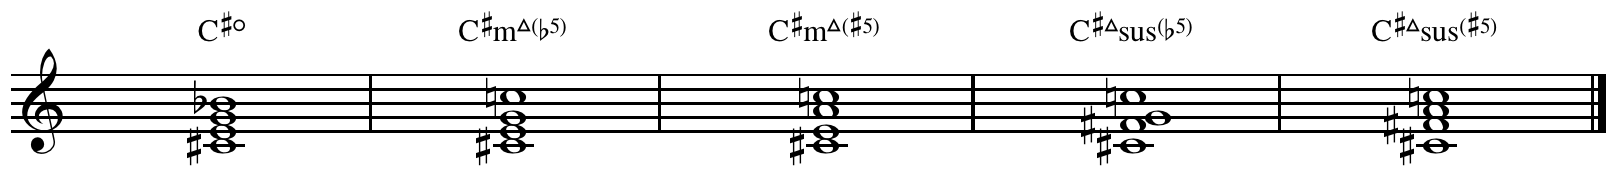 chords from secondary roots